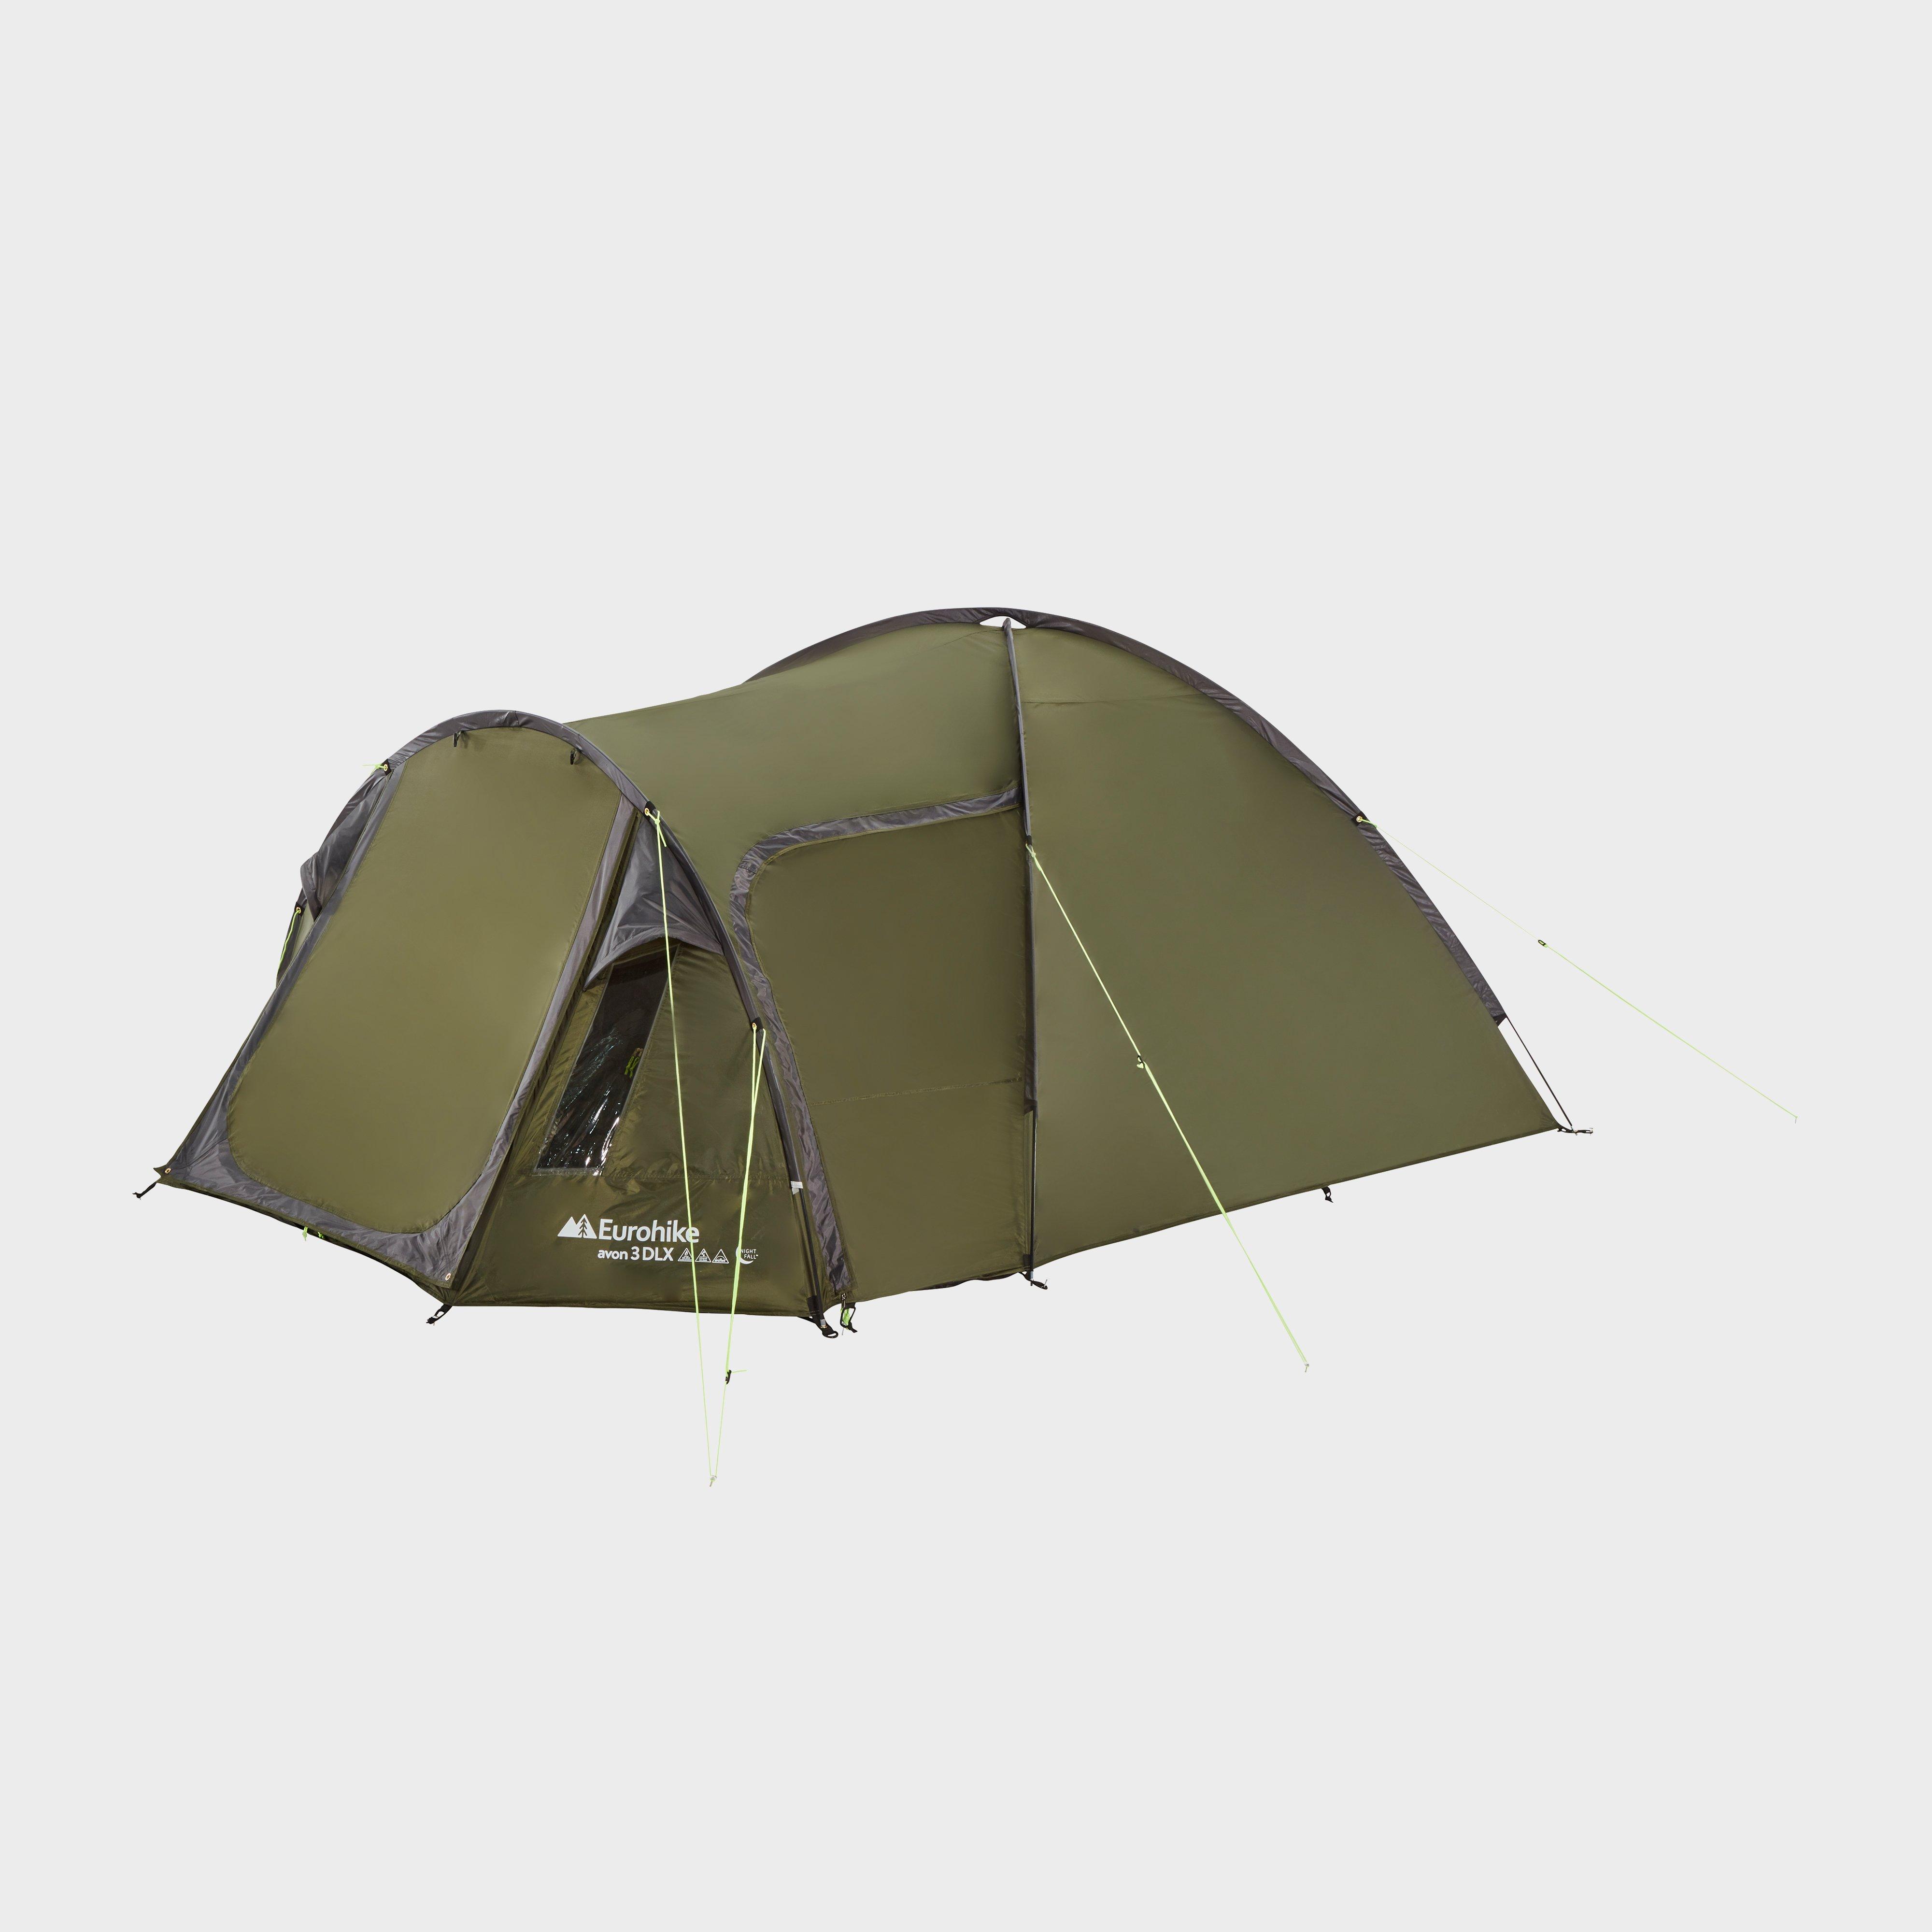 Eurohike Air 600 Tent Review